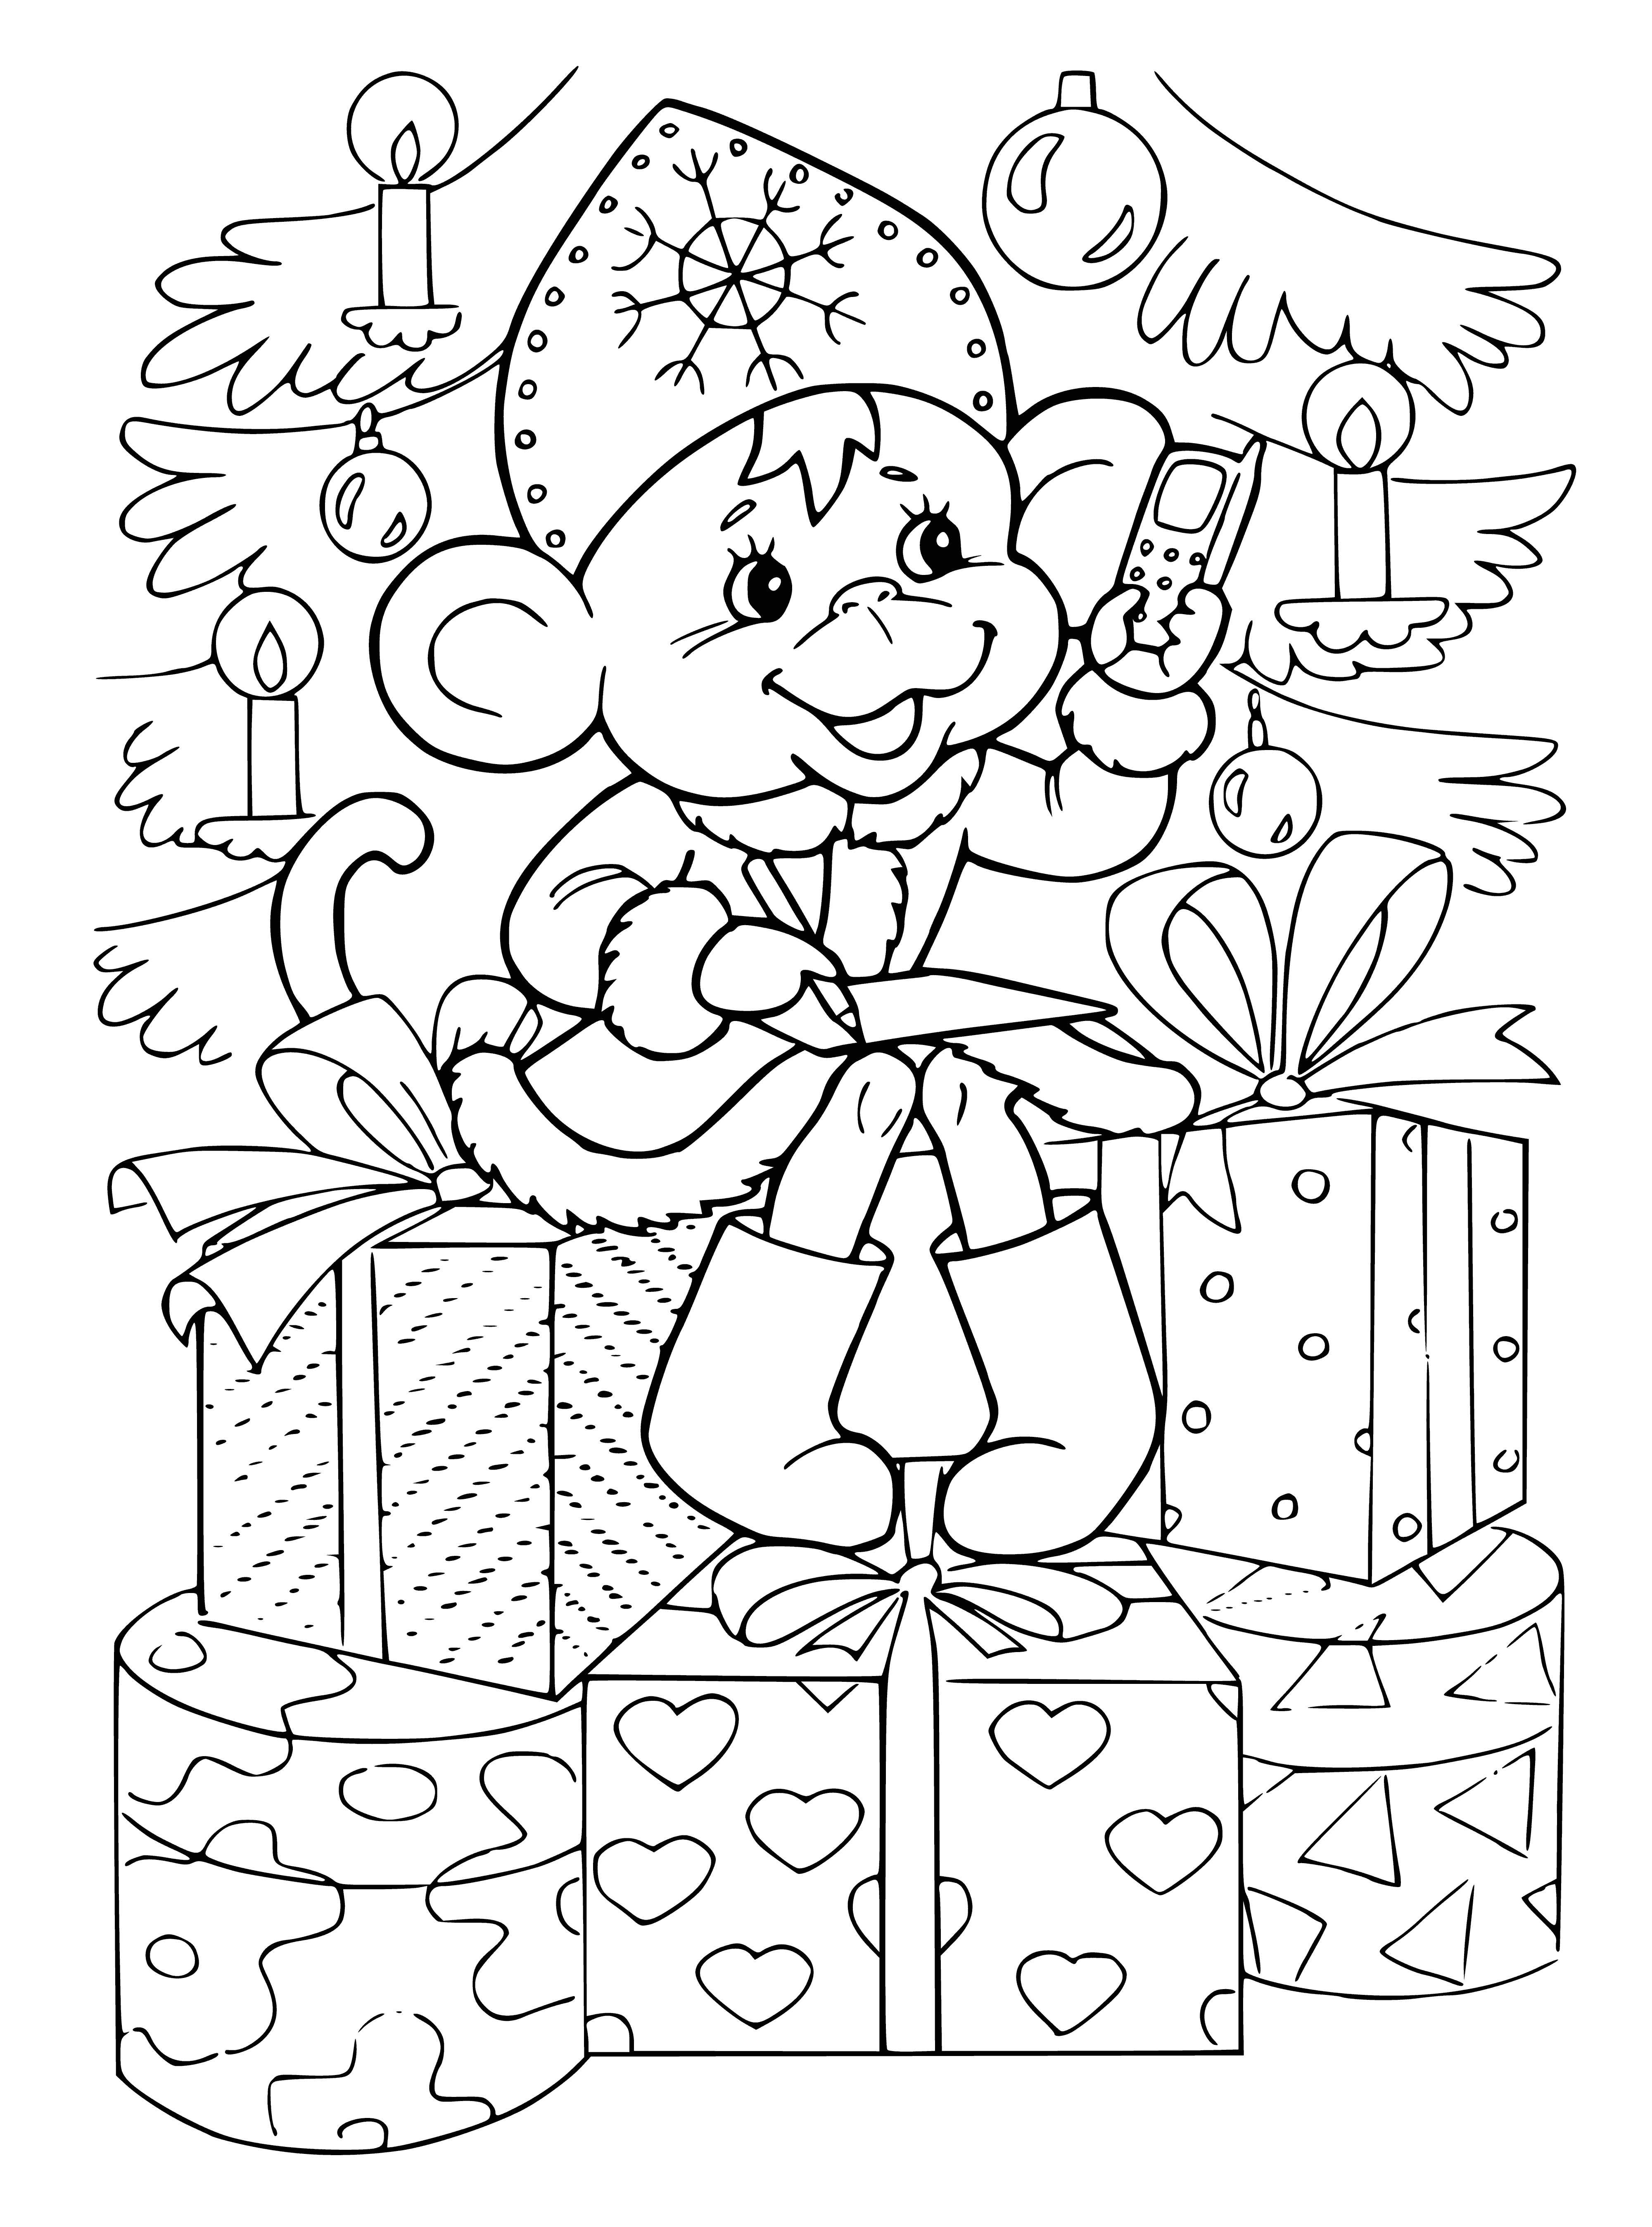 Monkey by the christmas tree coloring page